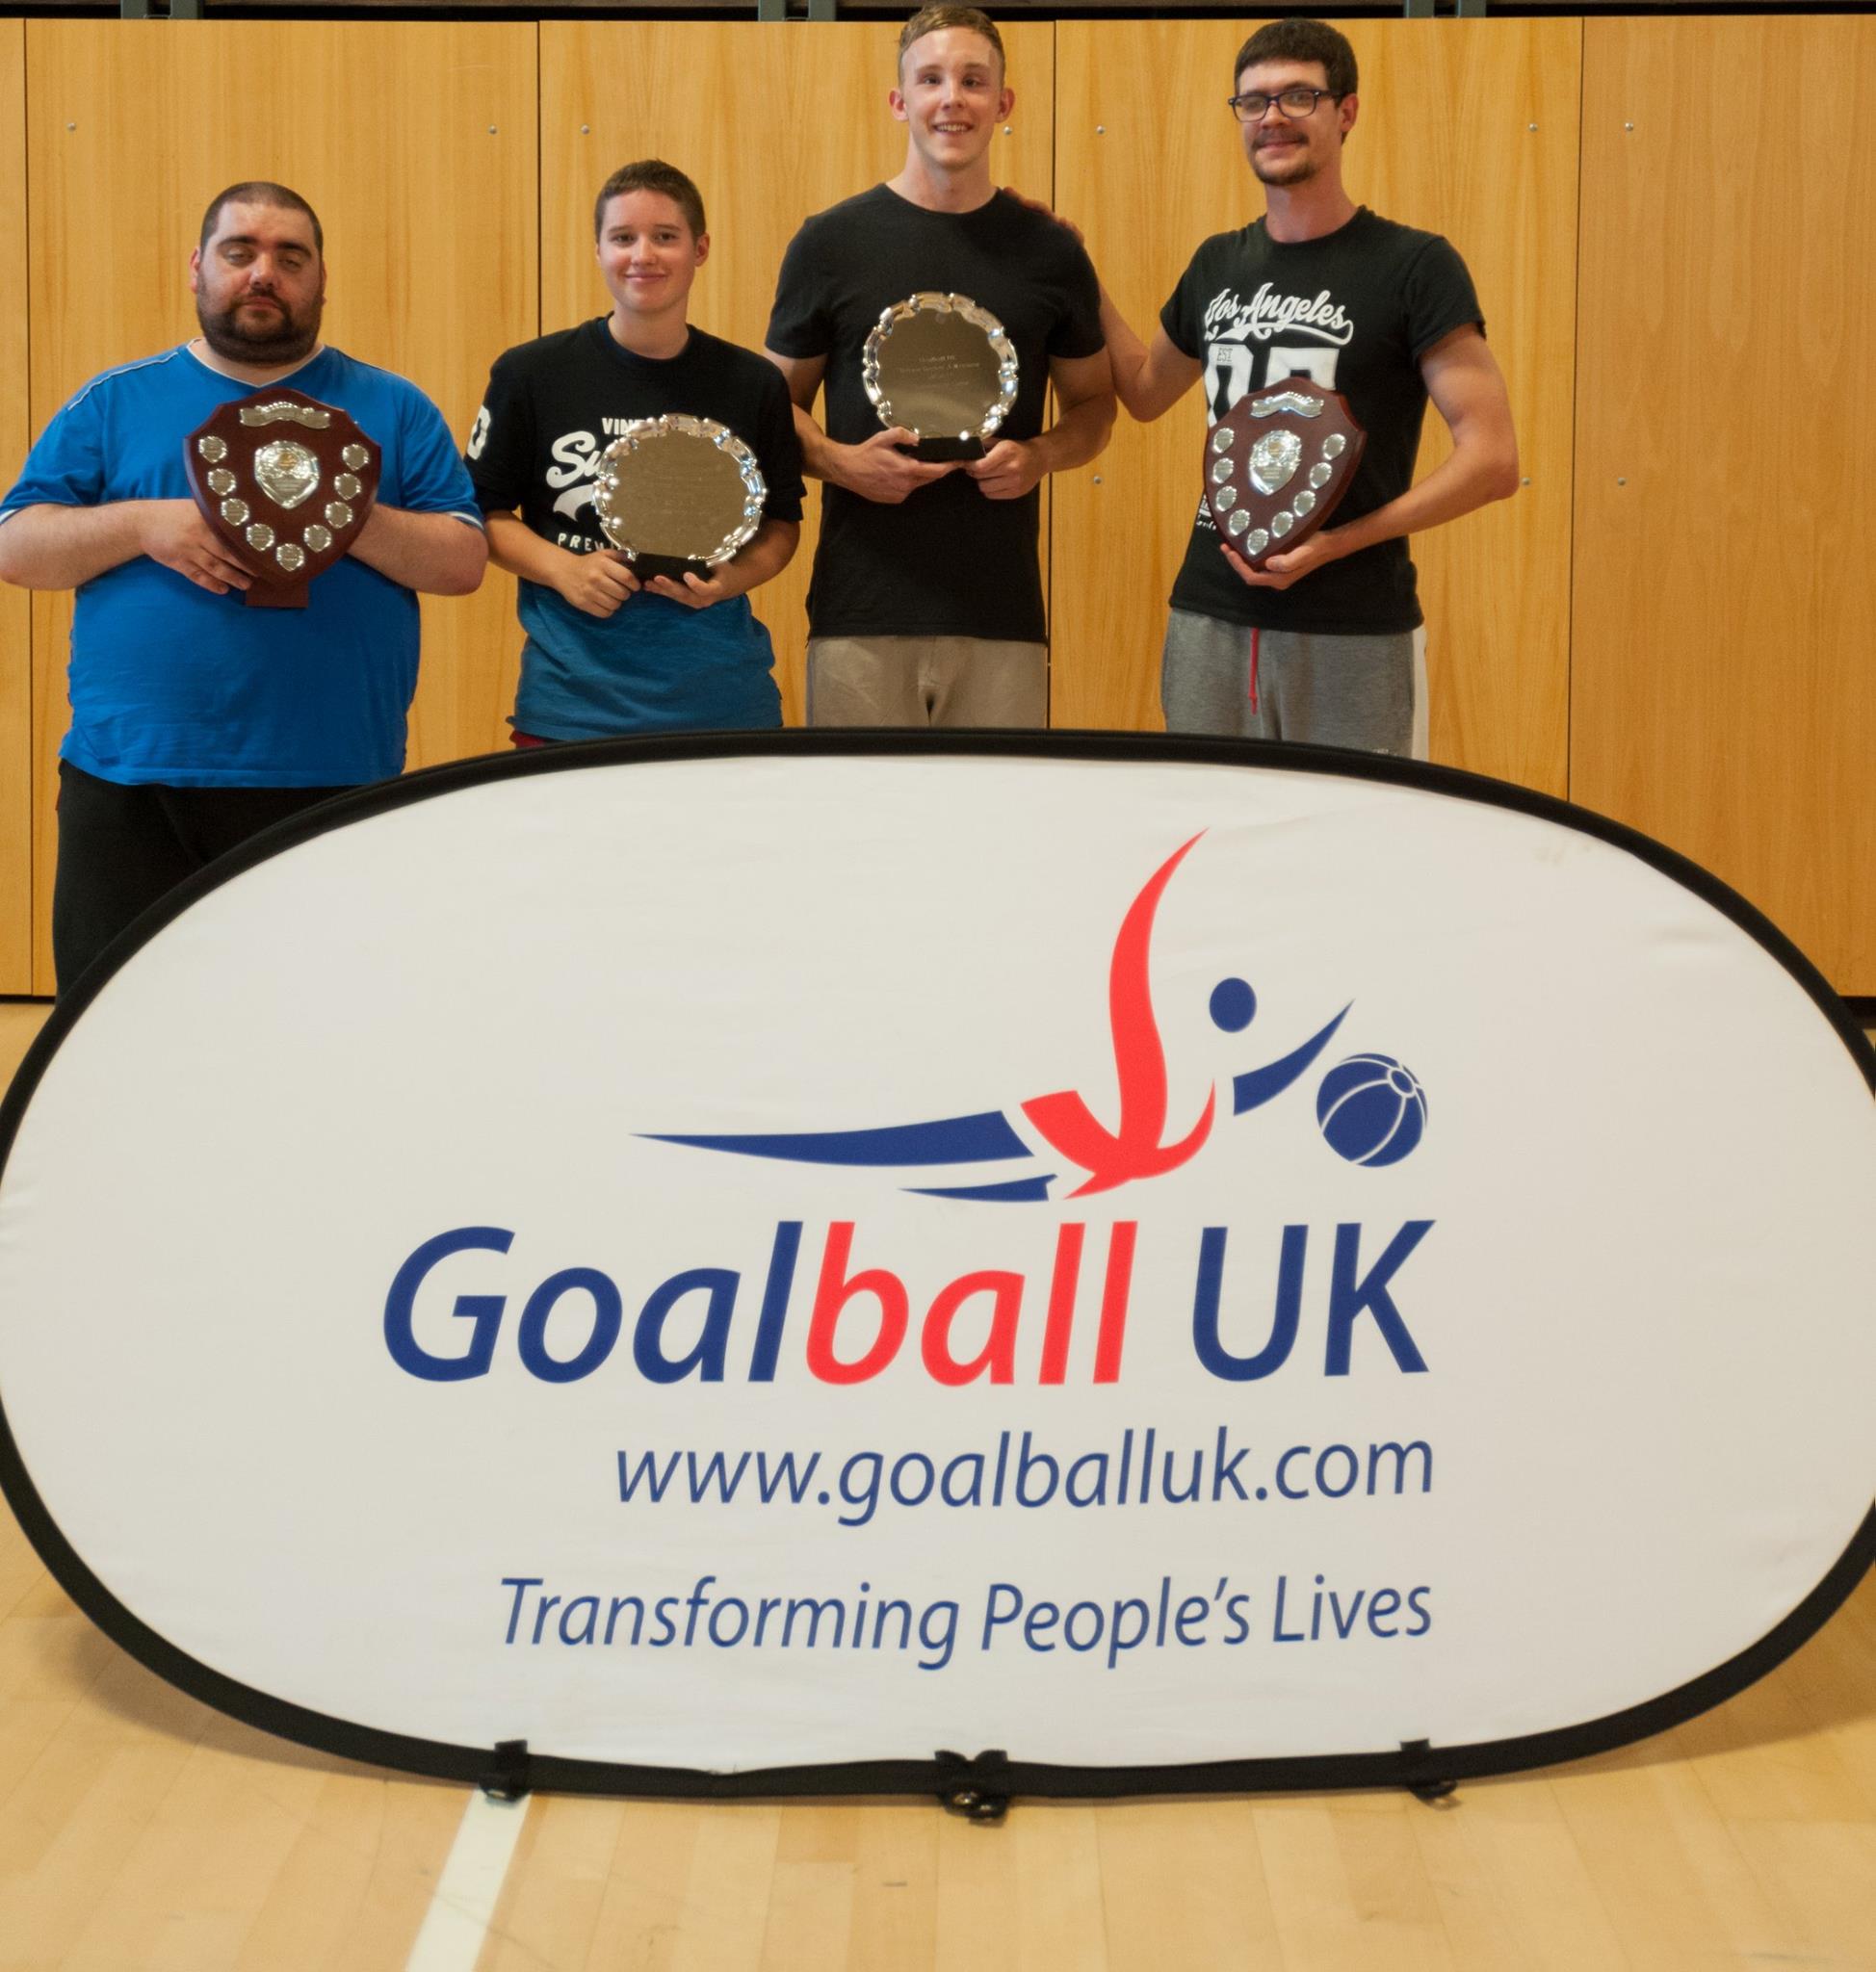 Matt Woof stood in a Lancashire Lions team photo in front of a Goalball UK banner. All 4 players are holding trophies!!